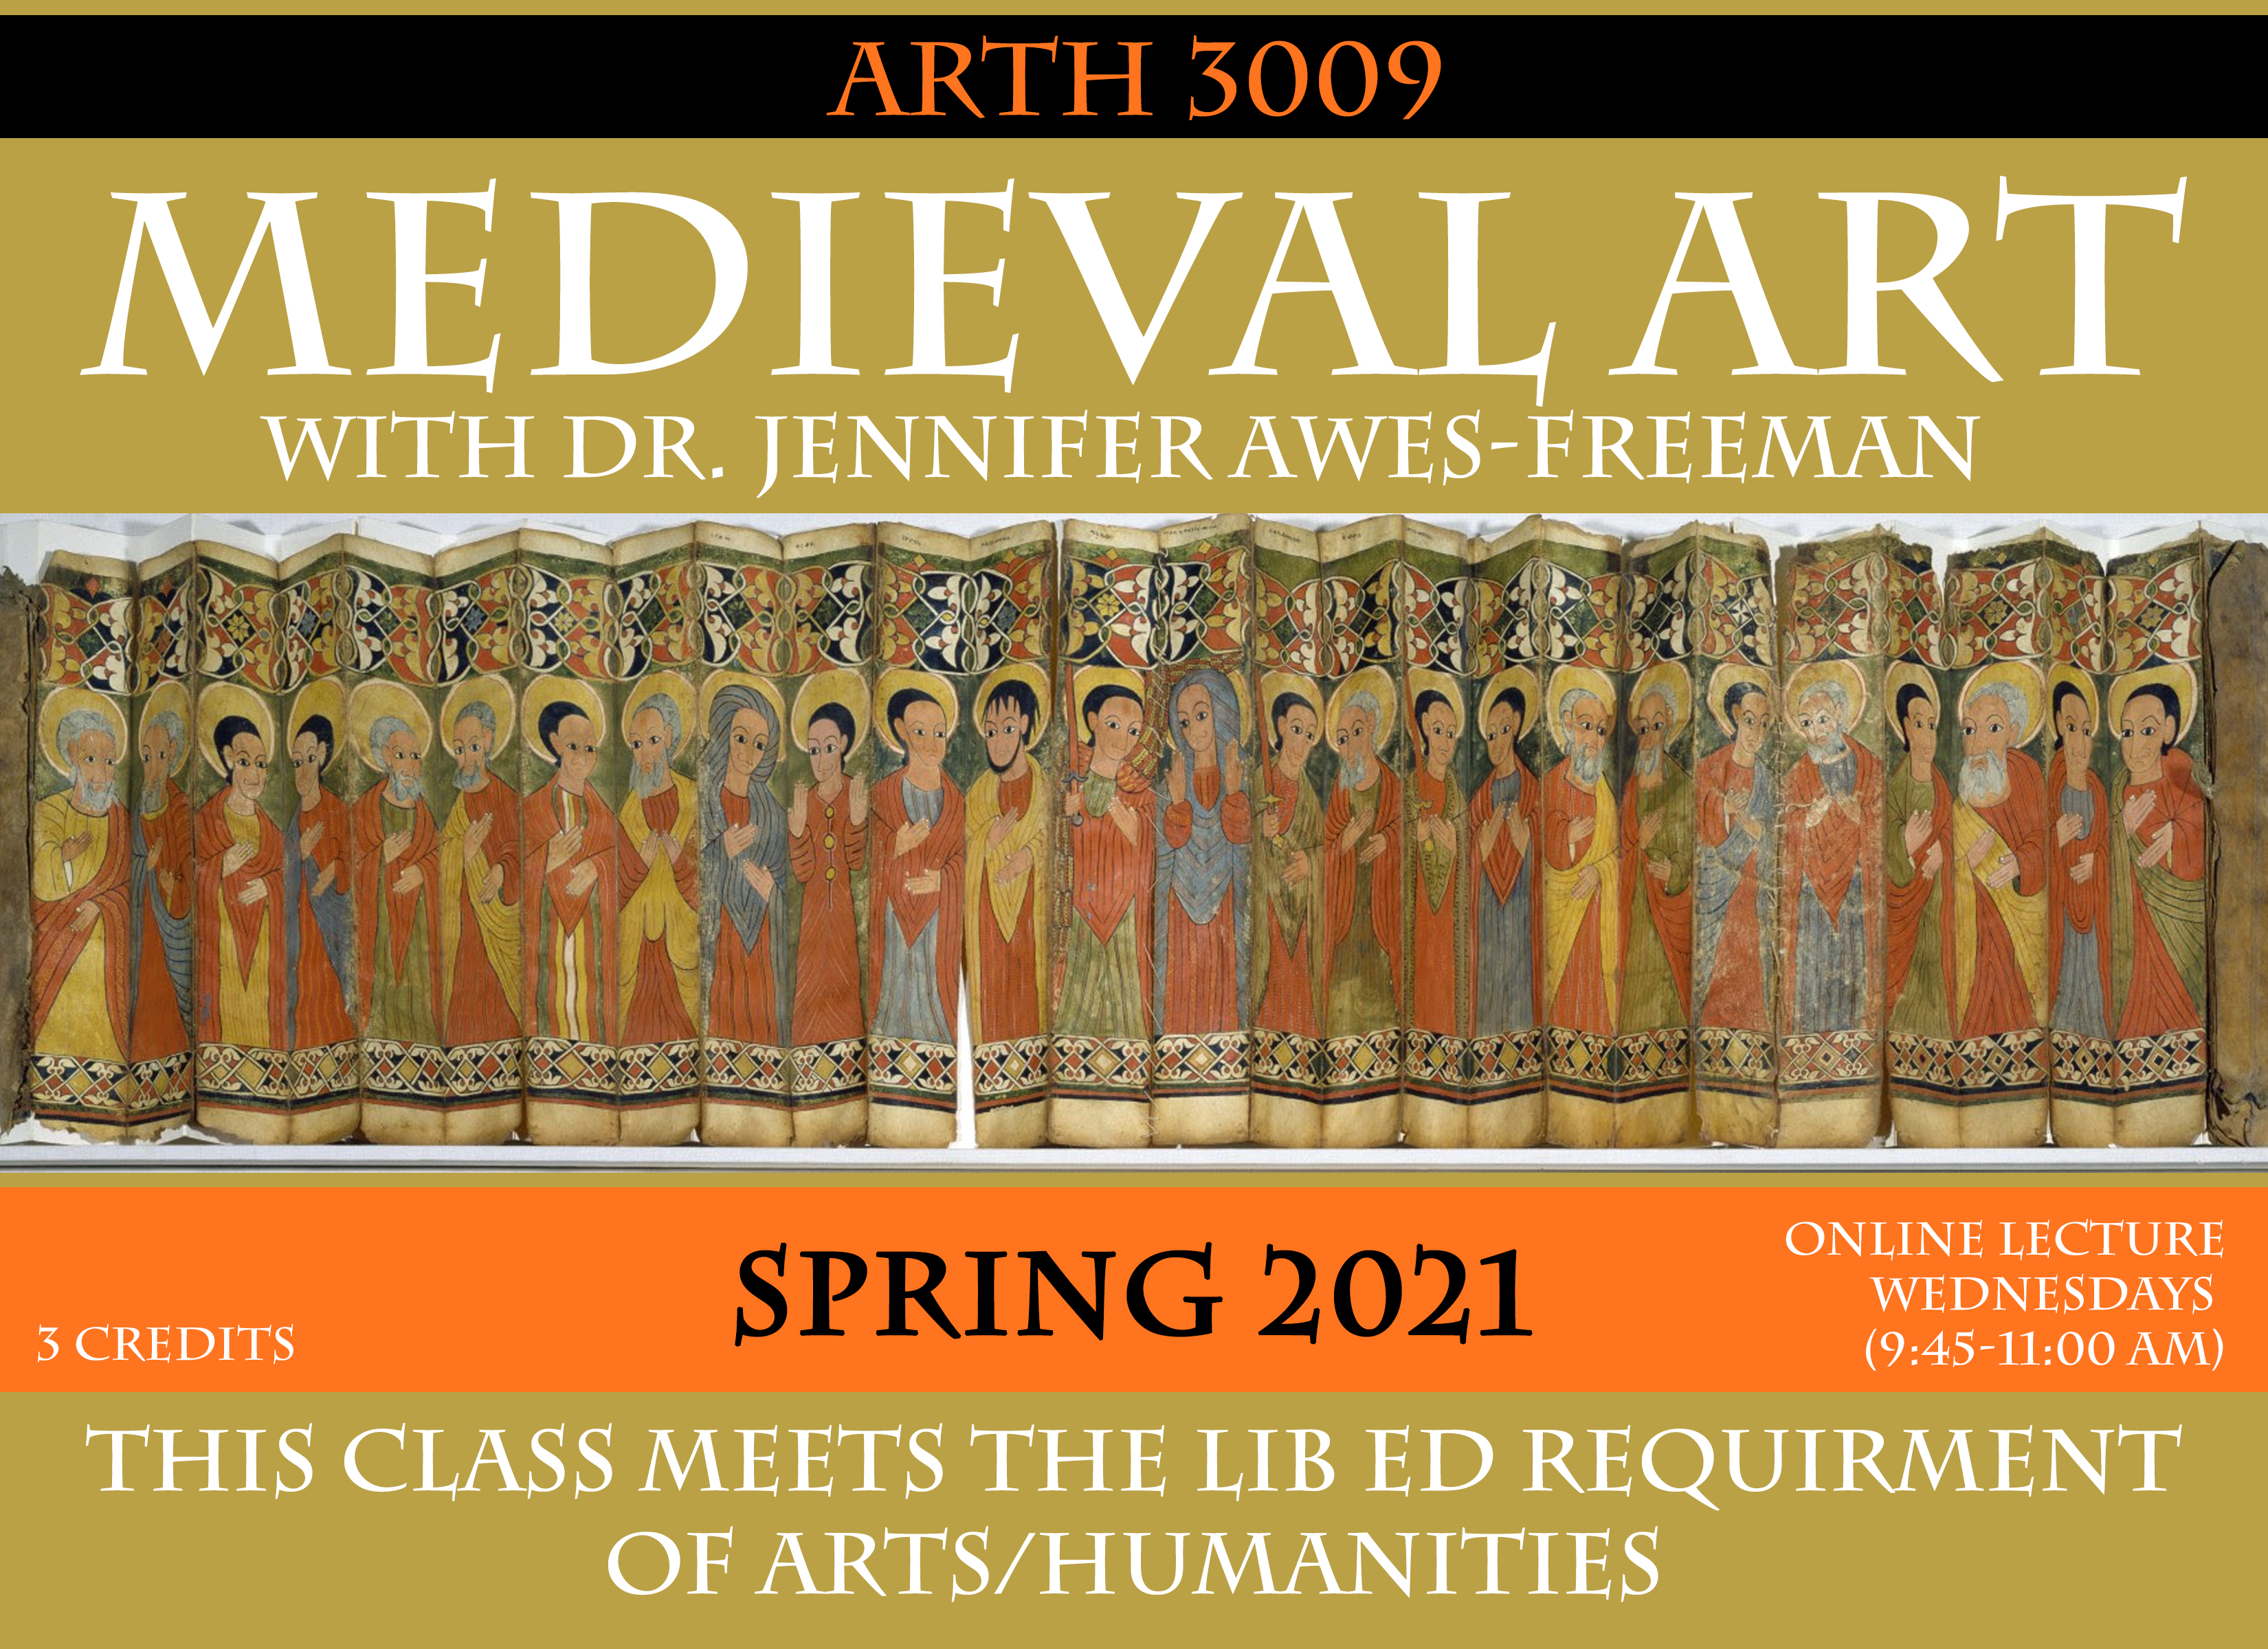 Course poster for ARTH 3009 Medieval Art with Dr. Jennifer Awes-Freeman. 3 credits. Spring 2021. Online lecture Wednesdays 9:45-11am. This class meets the lib ed requirement of arts/humanities